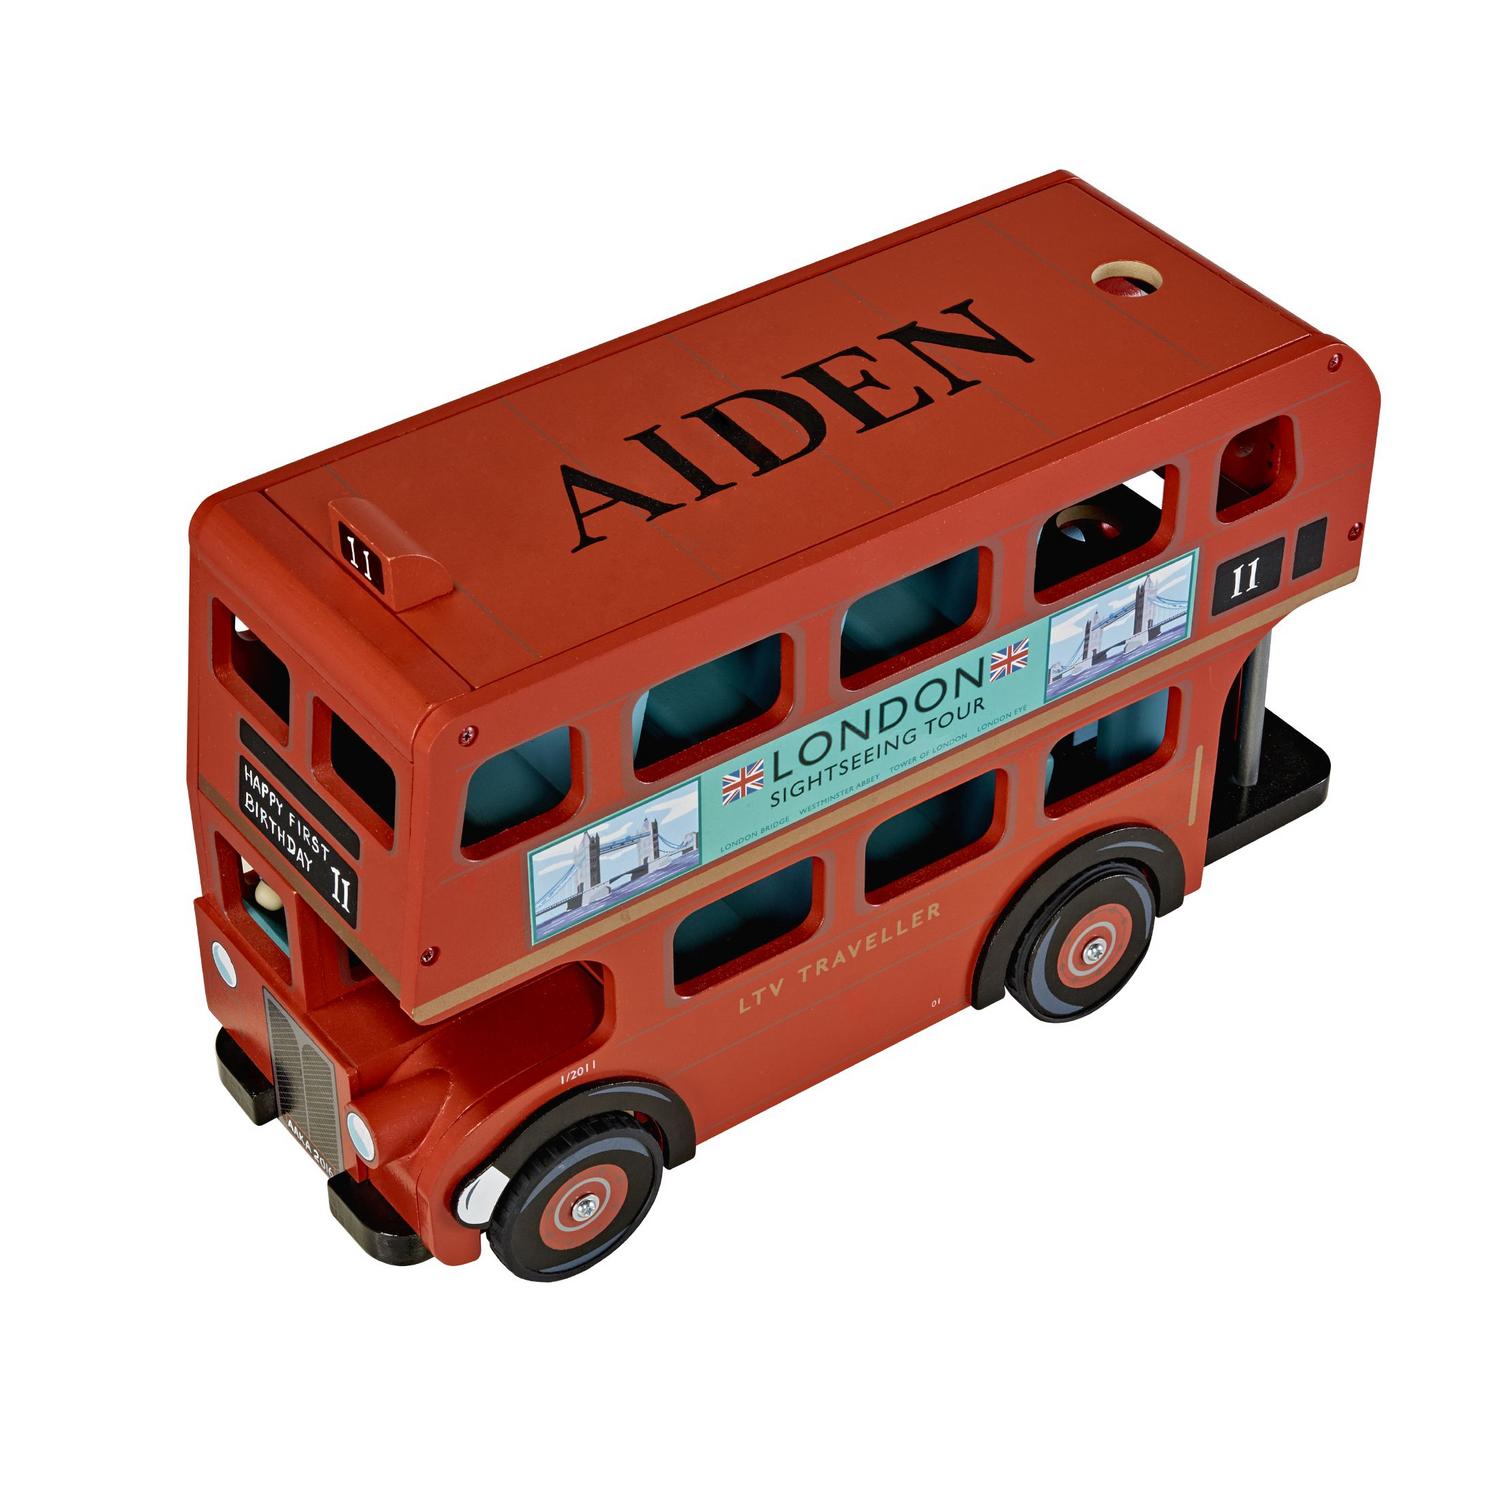 London Bus with Personalised Name - London Bus with Personalised Name